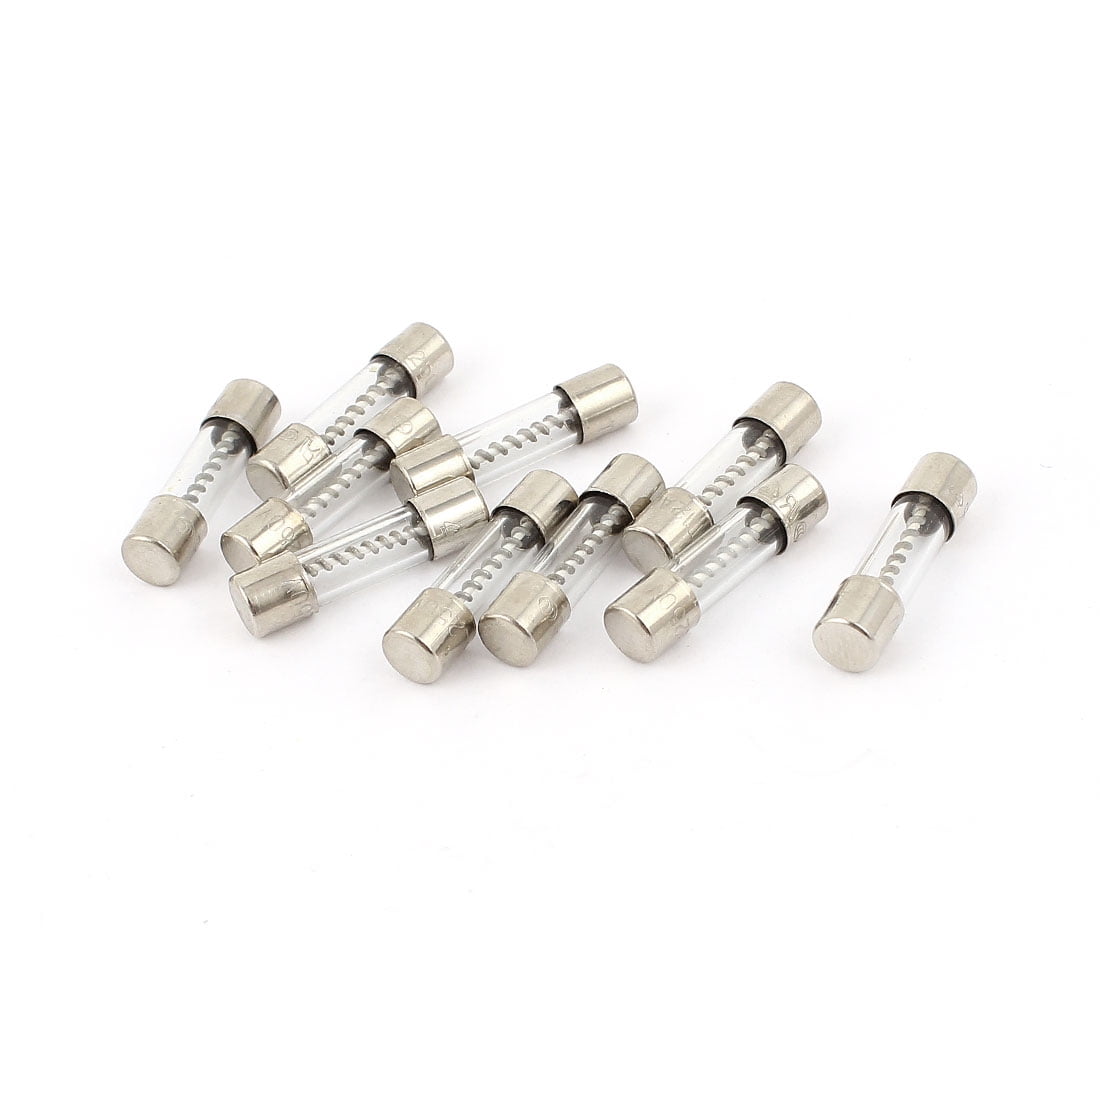 10 x 10 A verre 20 mm Time Delay Slow Blow Fuse 